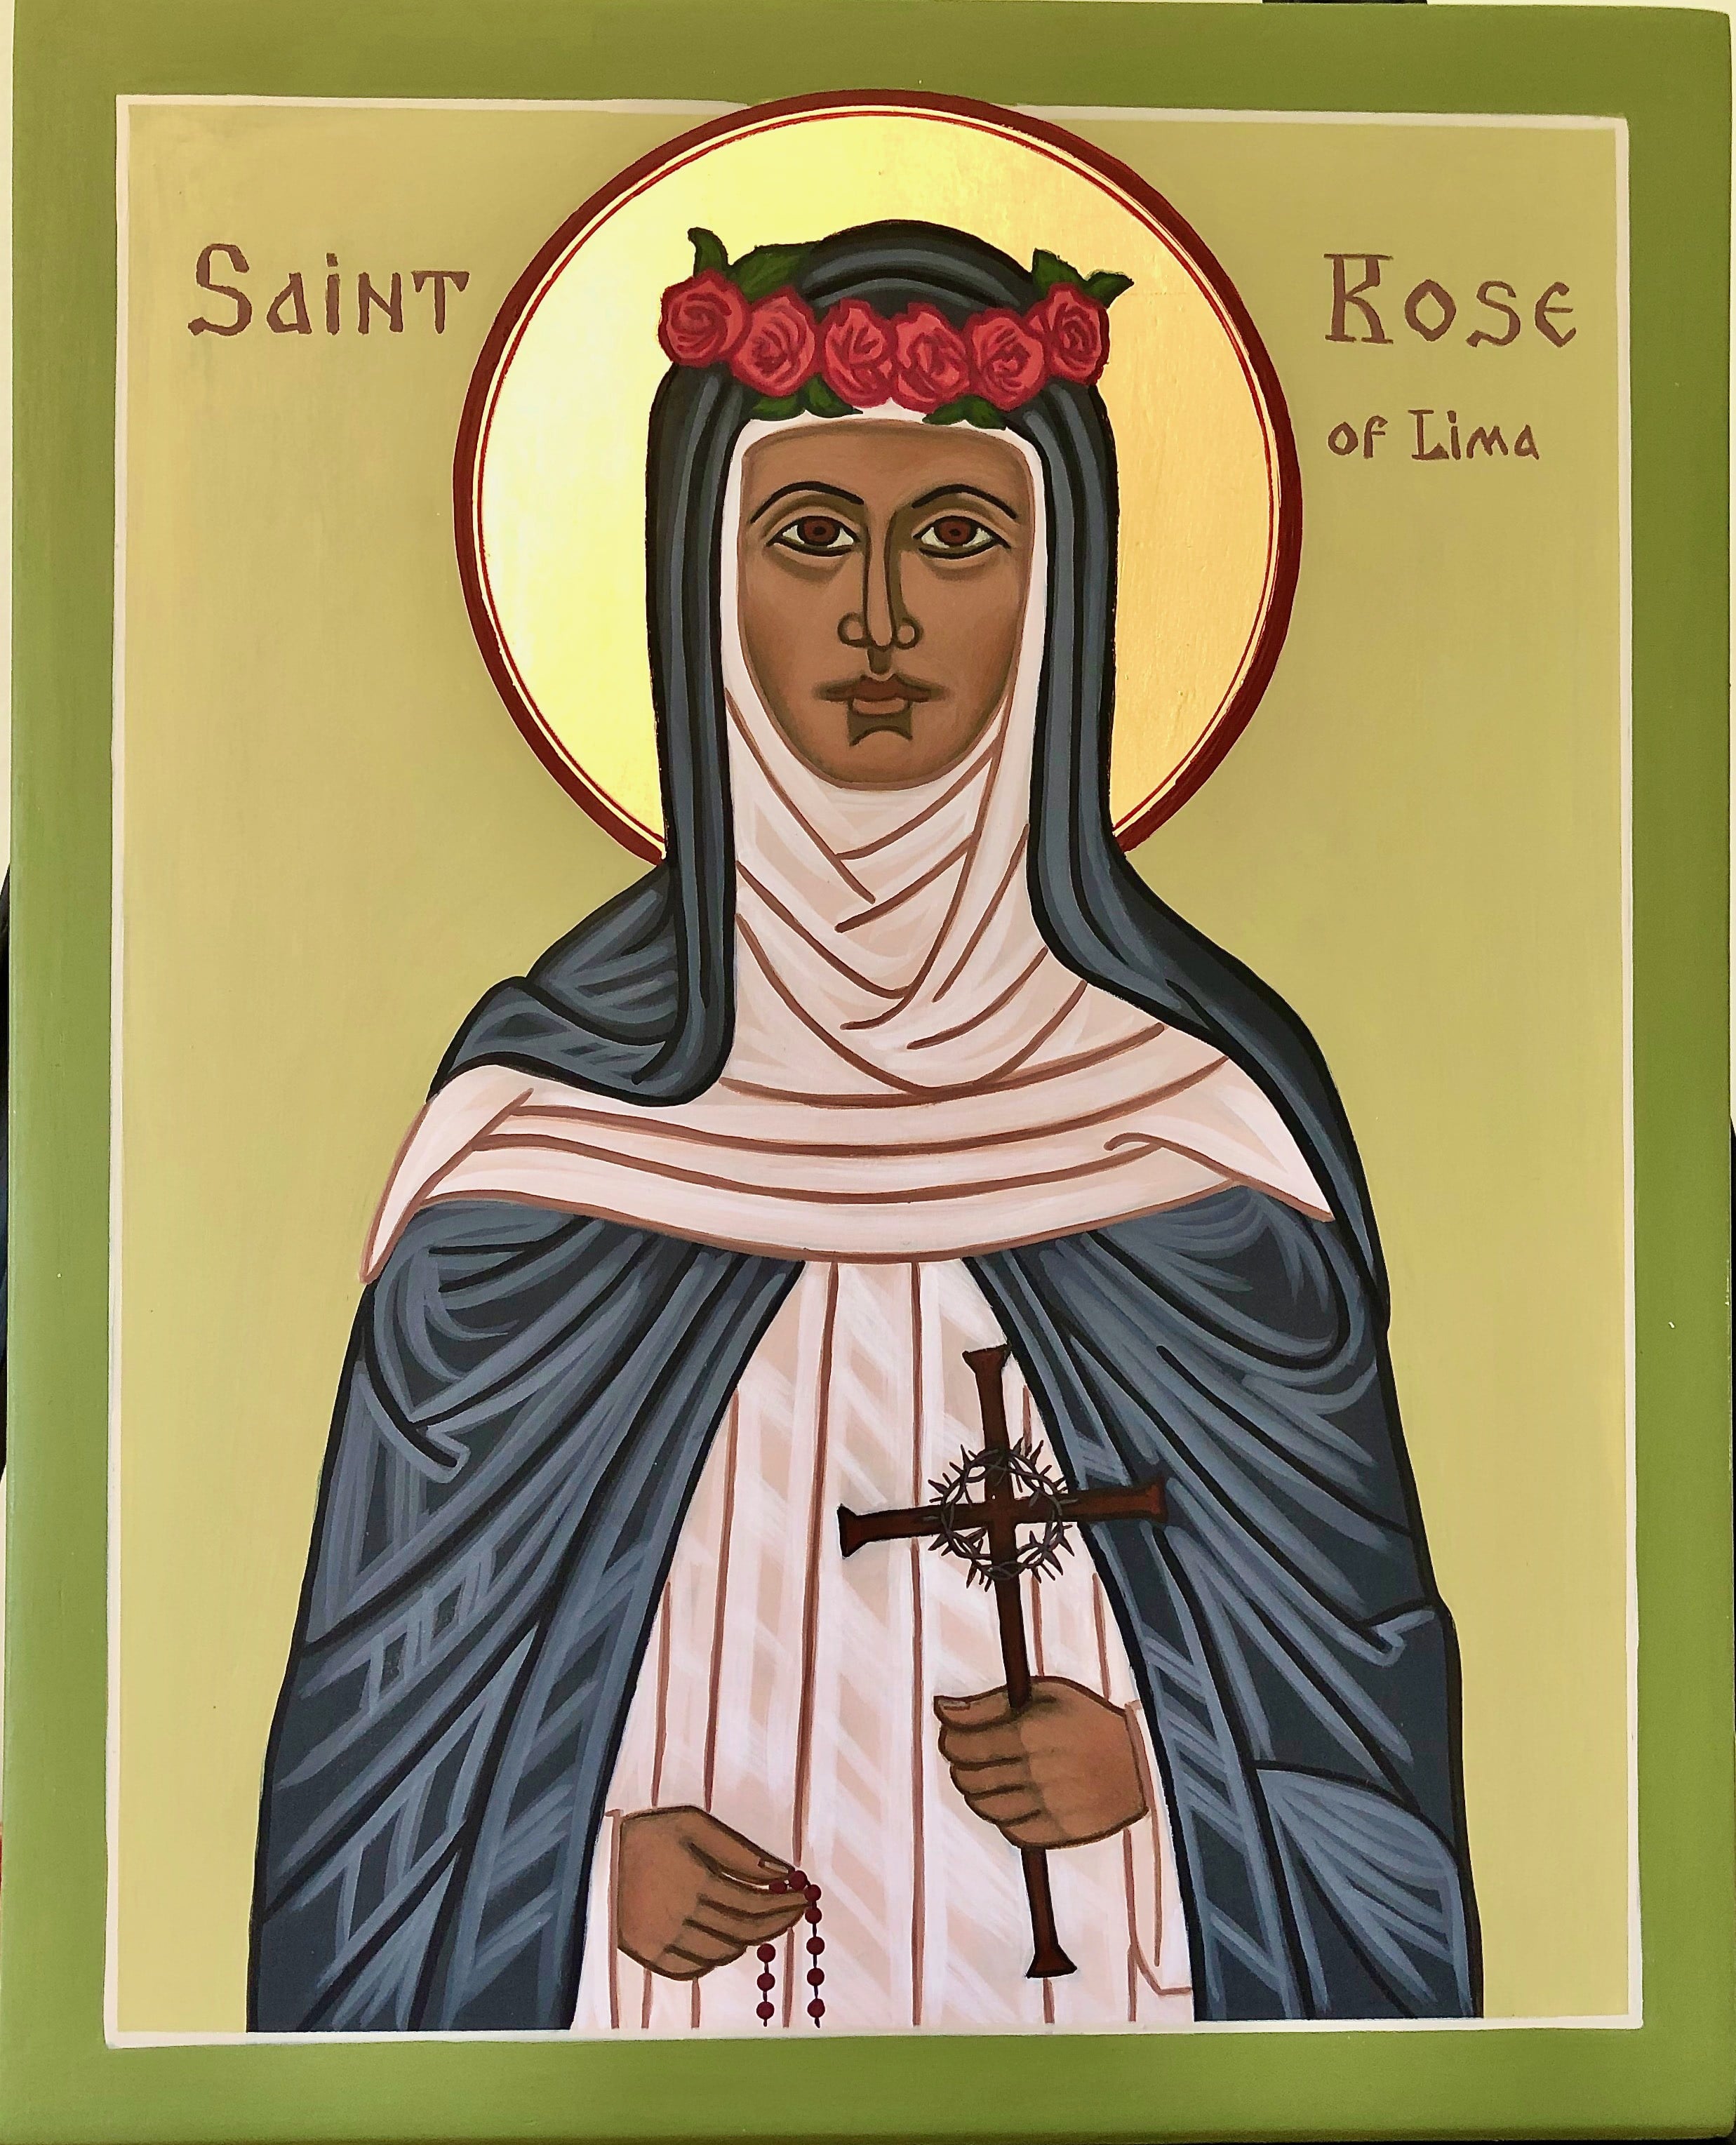 St. Rose of Lima, Patron of Latin America and Philippines, Feast day August 23.